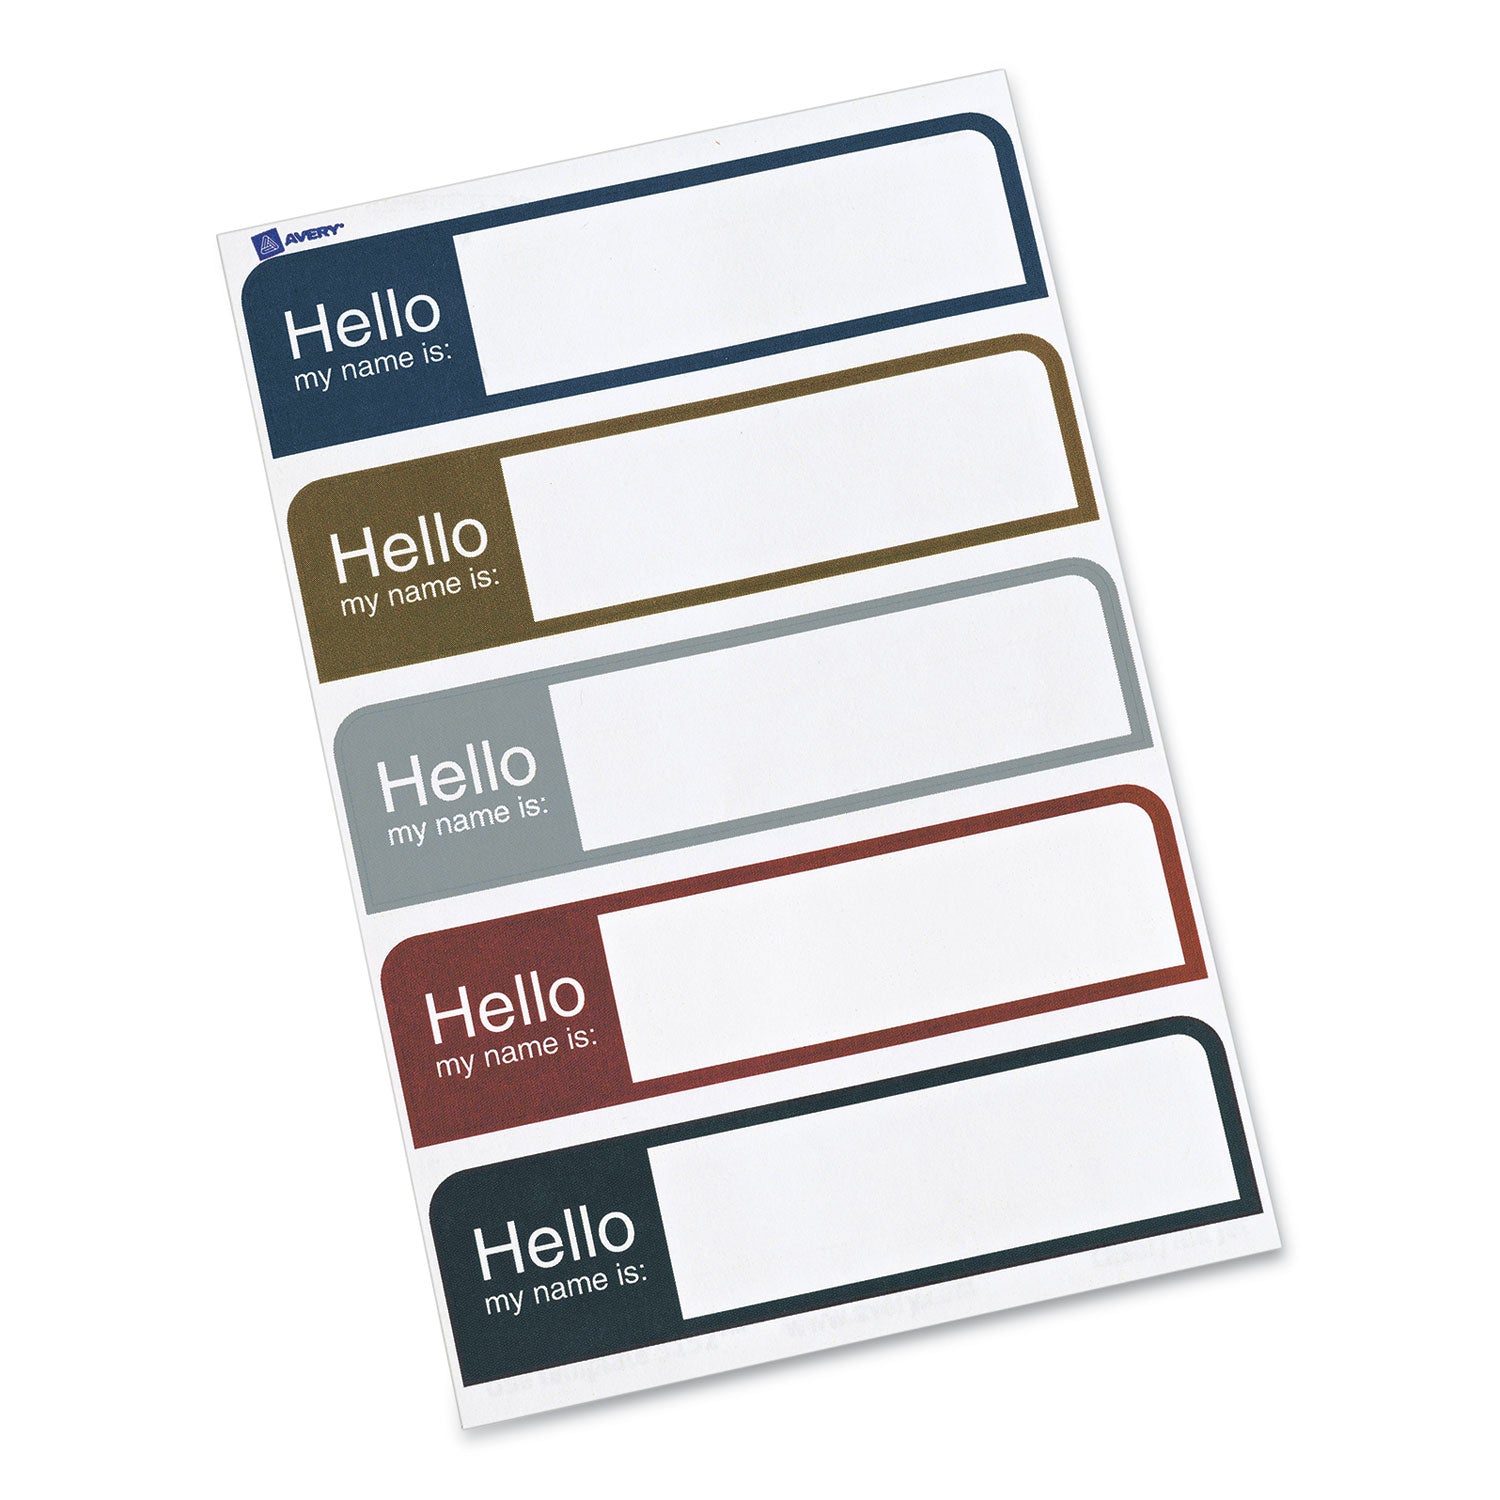 flexible-self-adhesive-mini-name-badge-labels-1-x-375-hello-assorted-100-pack_ave5154 - 2